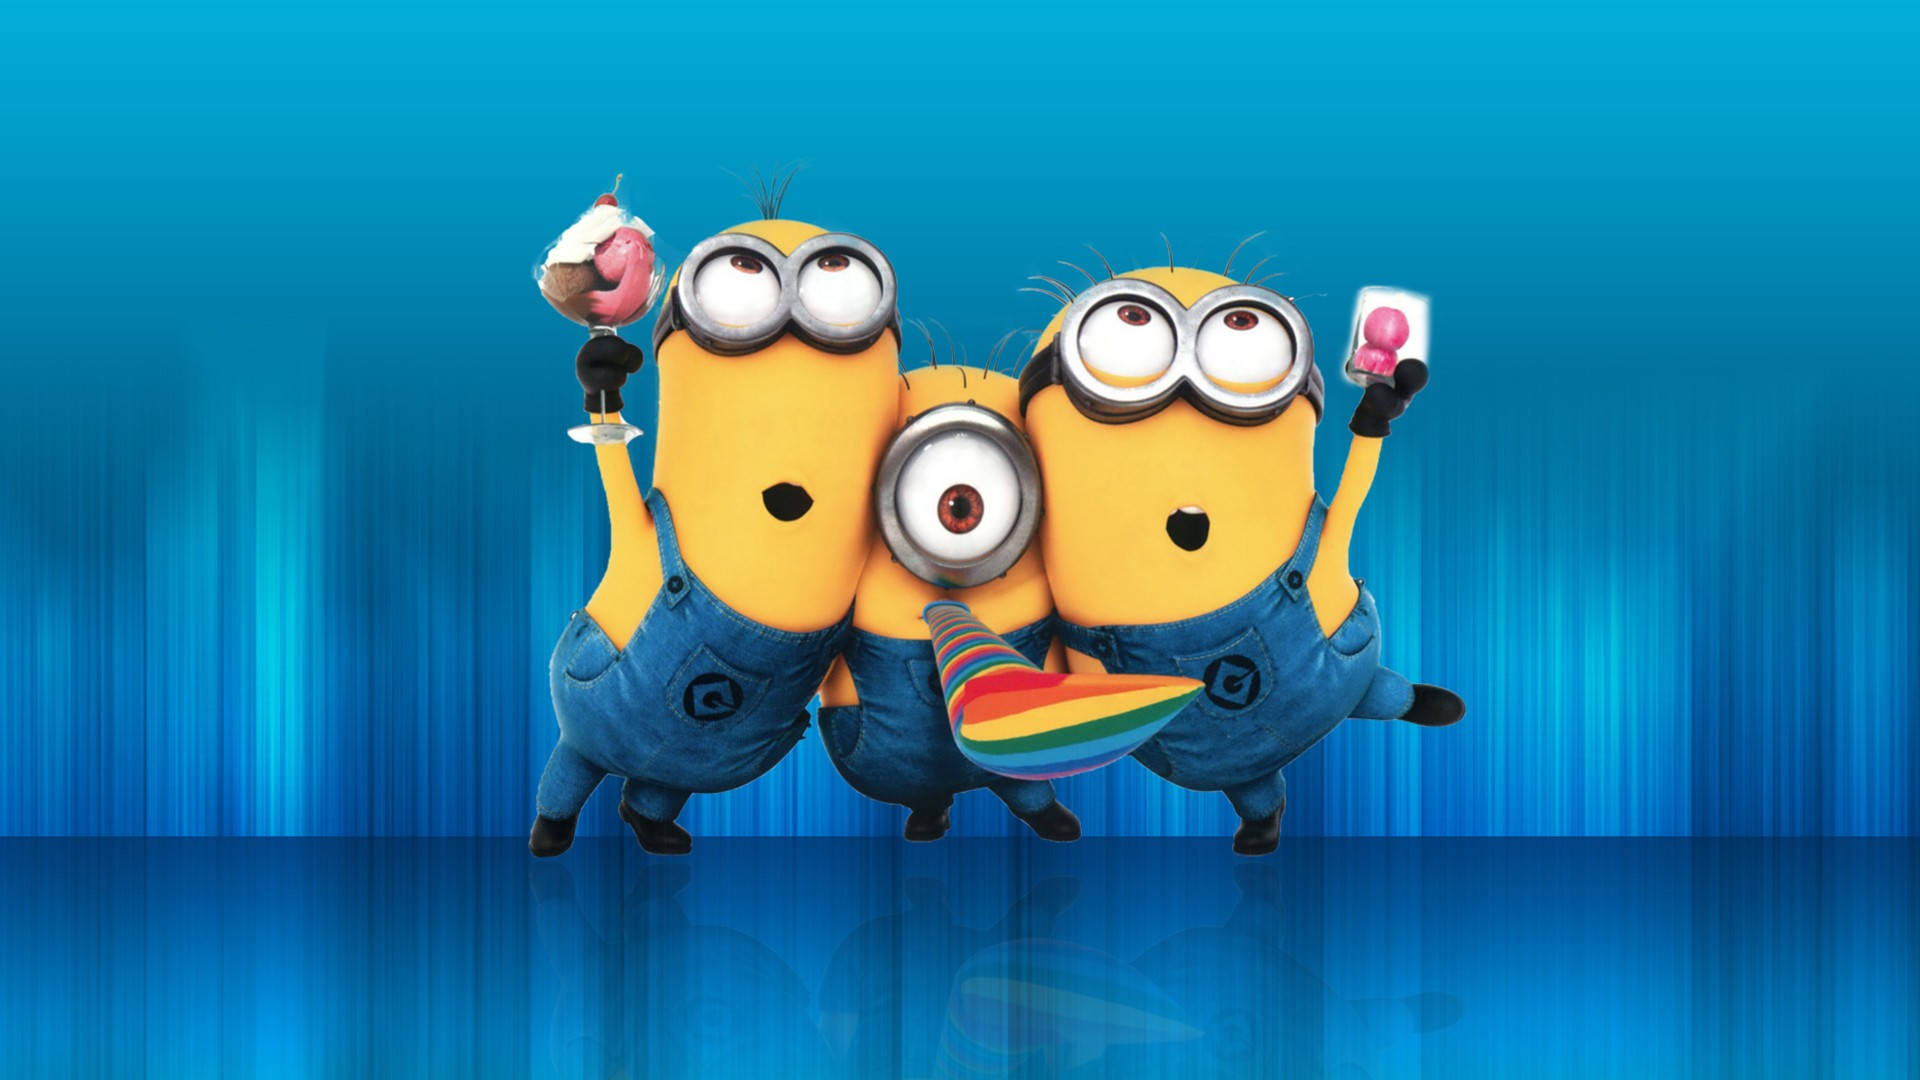 Minions Wallpaper Images